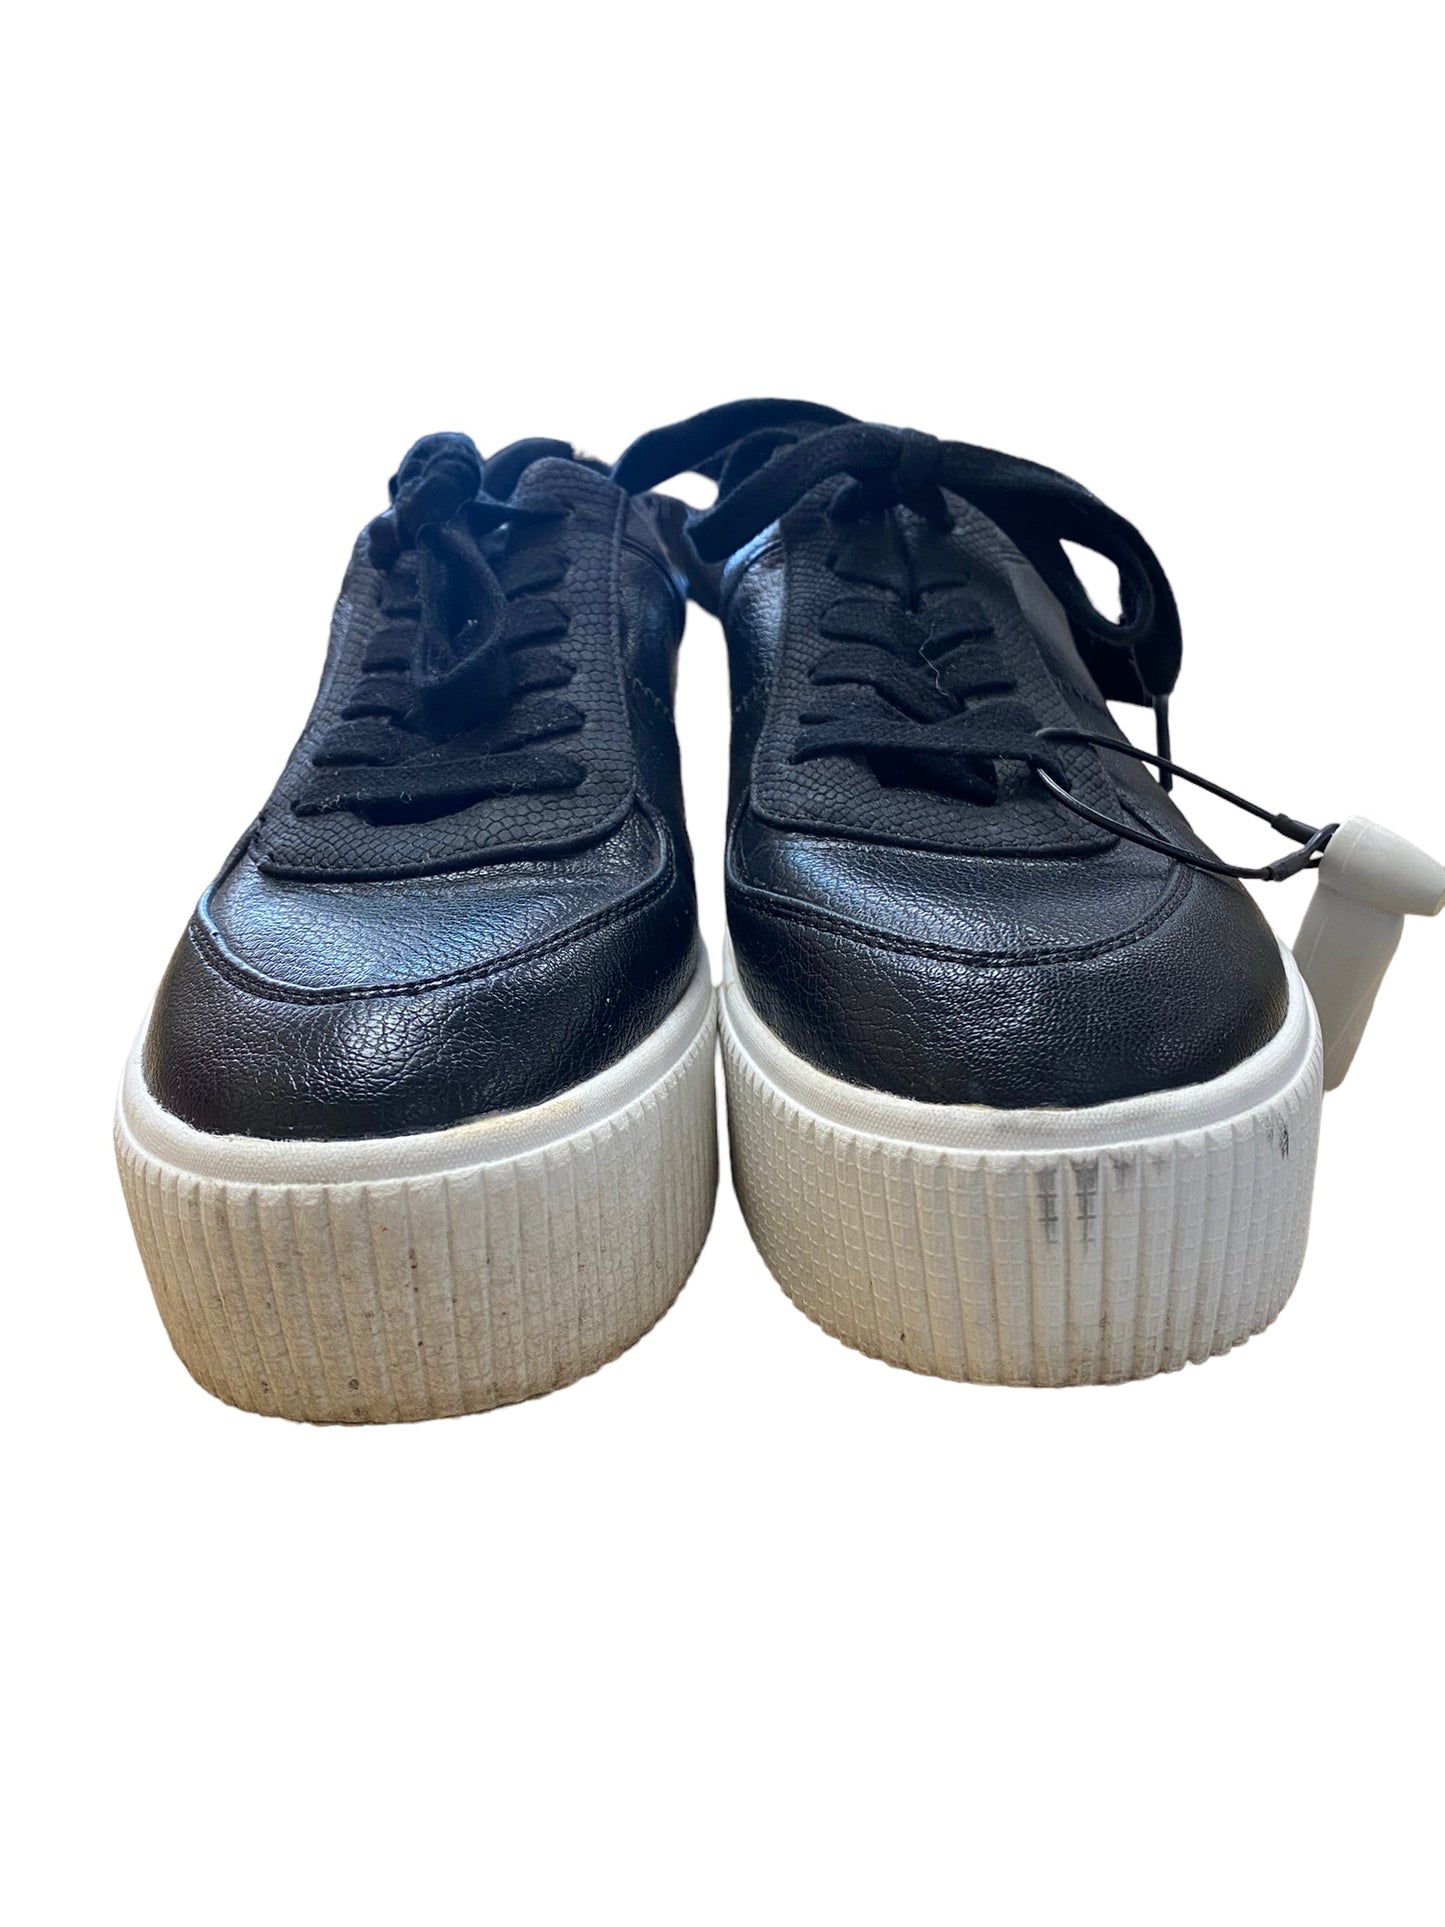 Shoes Sneakers By Mix No 6  Size: 9